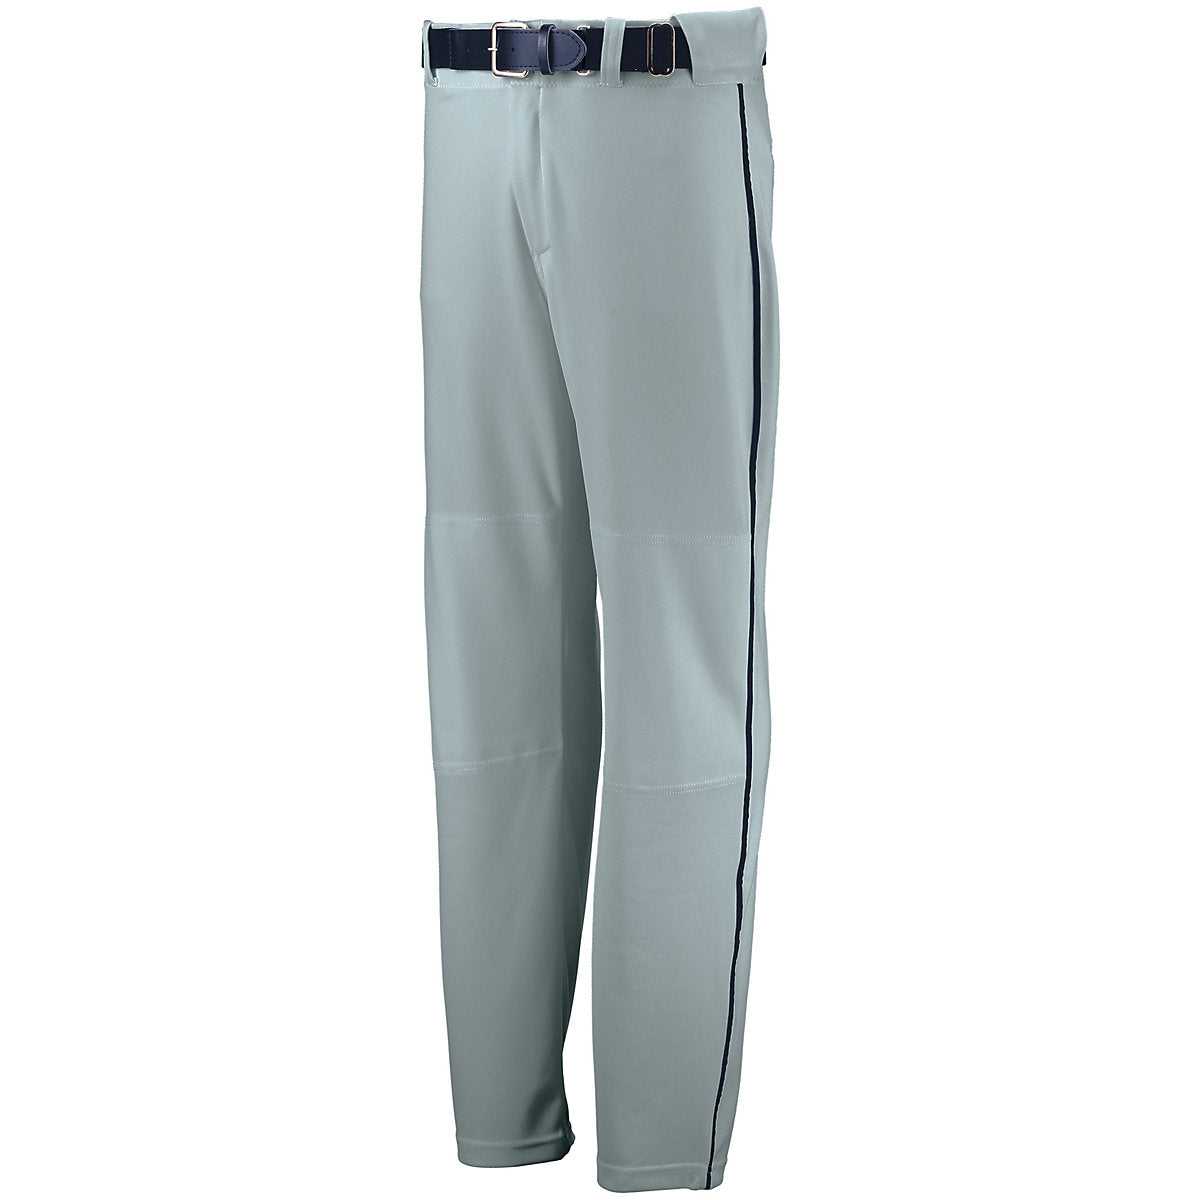 Russell 233L2M Open Bottom Piped Pant - Baseball Grey Navy - HIT a Double